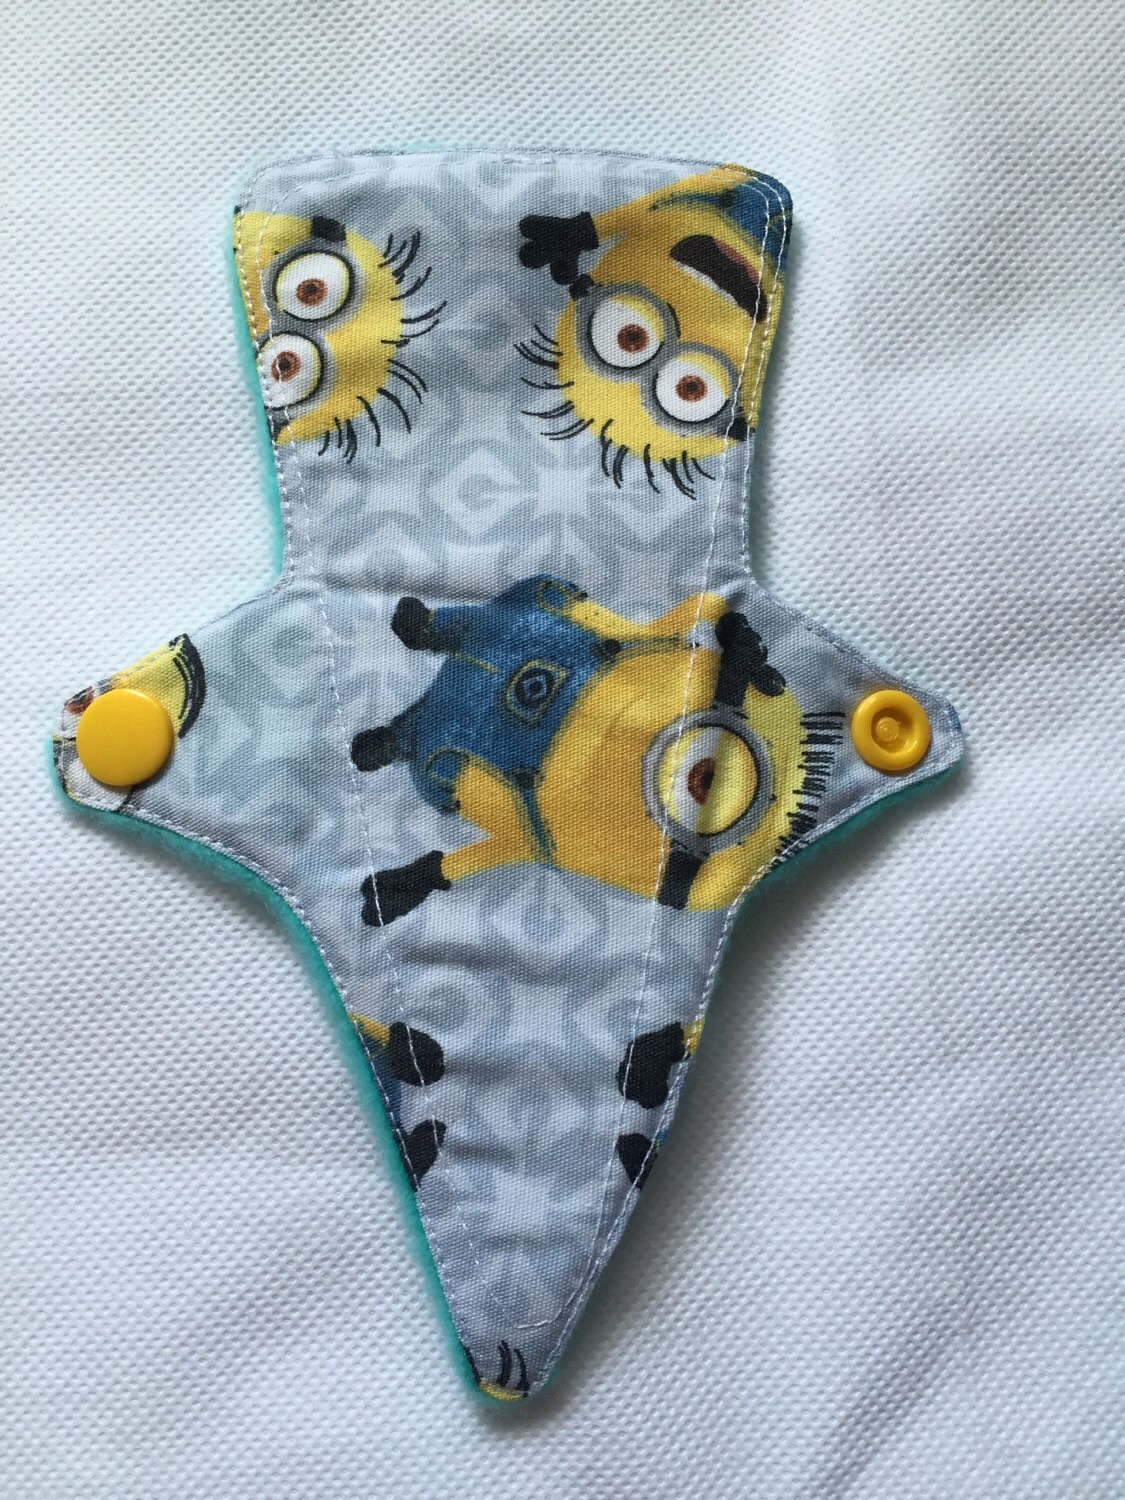 minion with a thong